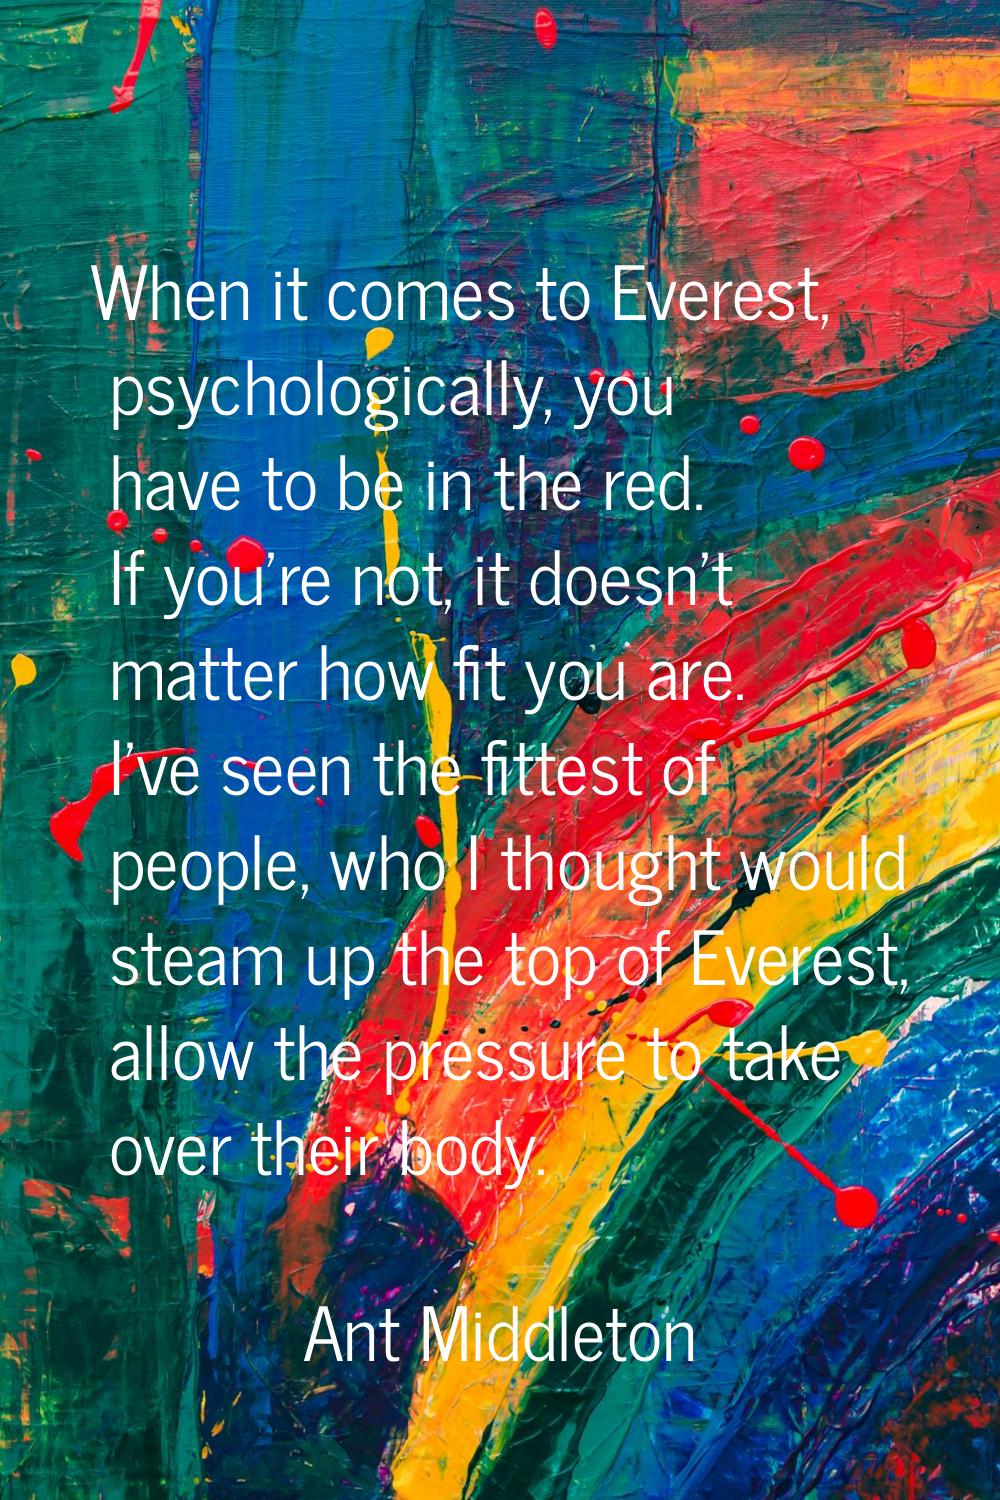 When it comes to Everest, psychologically, you have to be in the red. If you're not, it doesn't mat